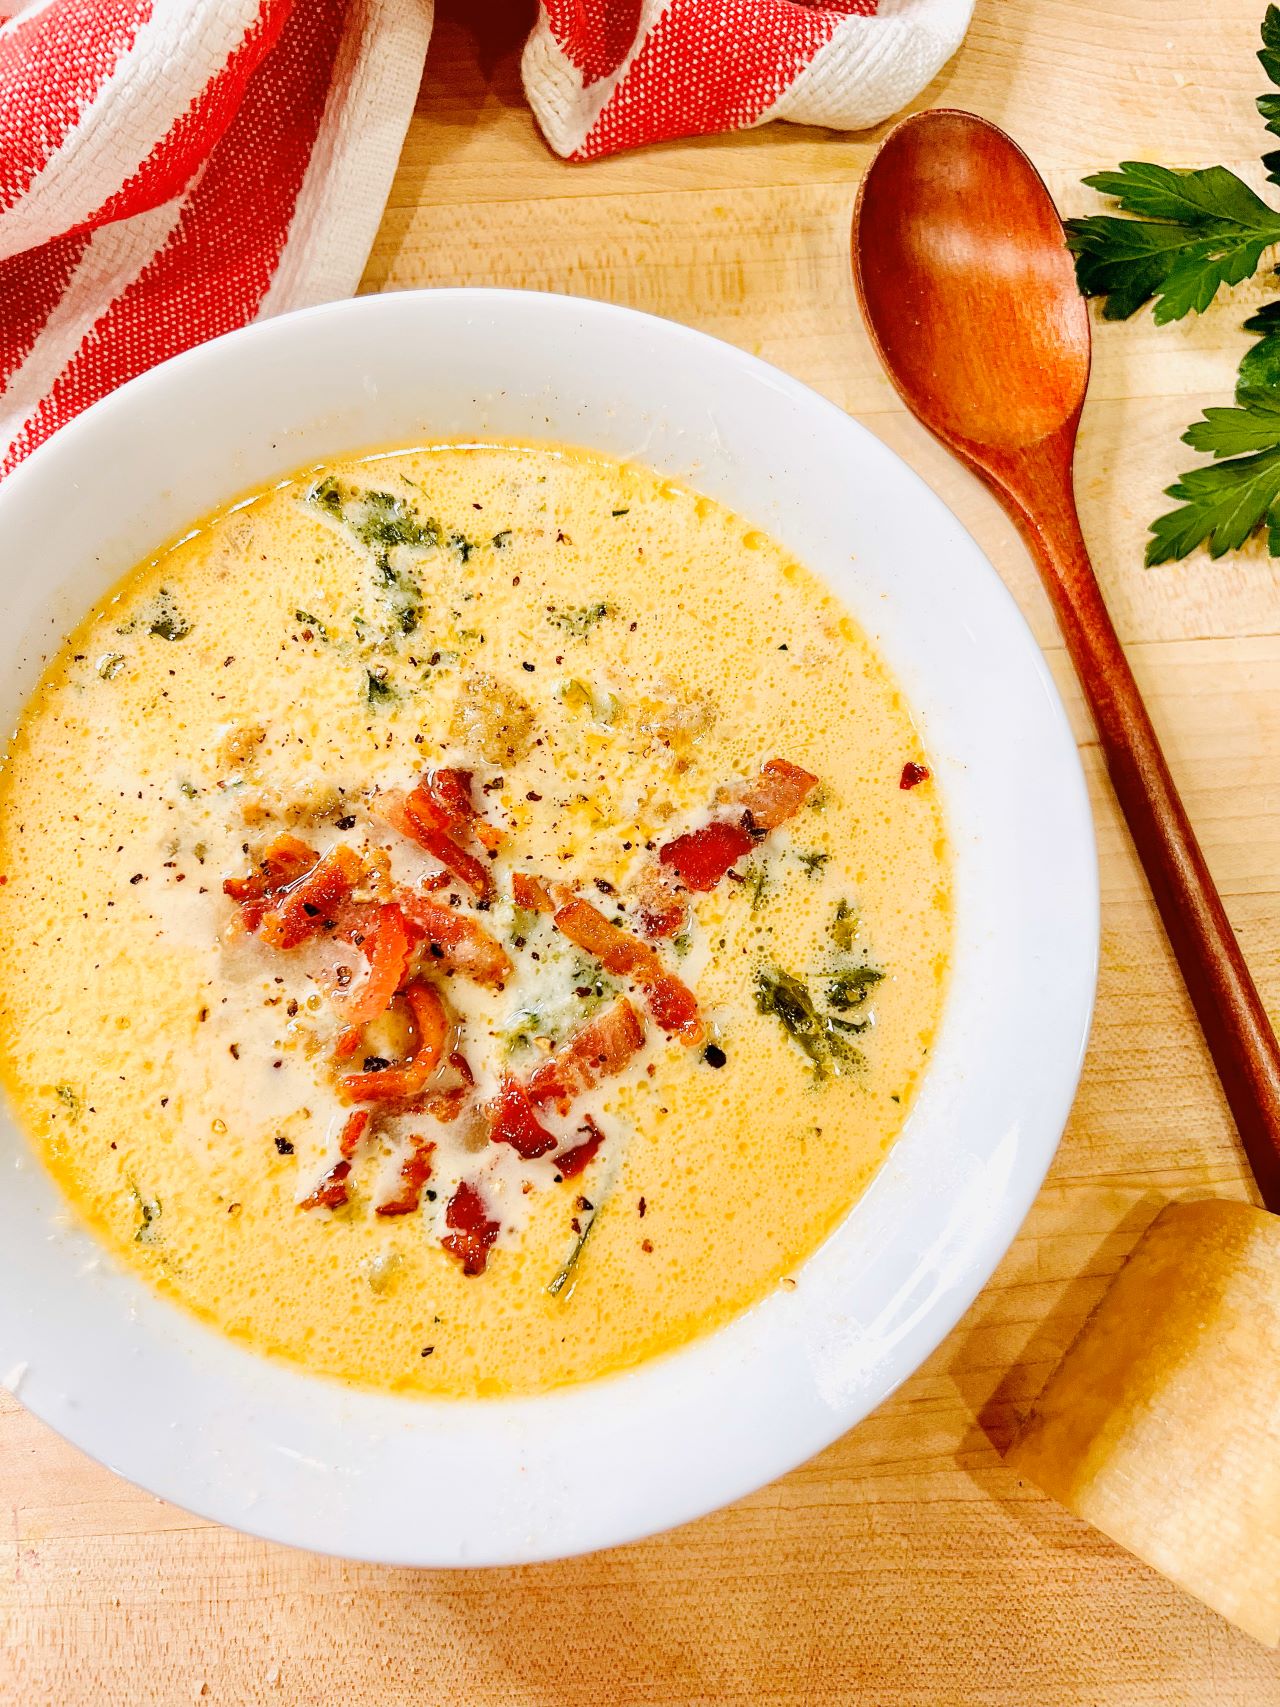 Bowl of Zuppa Toscana Soup